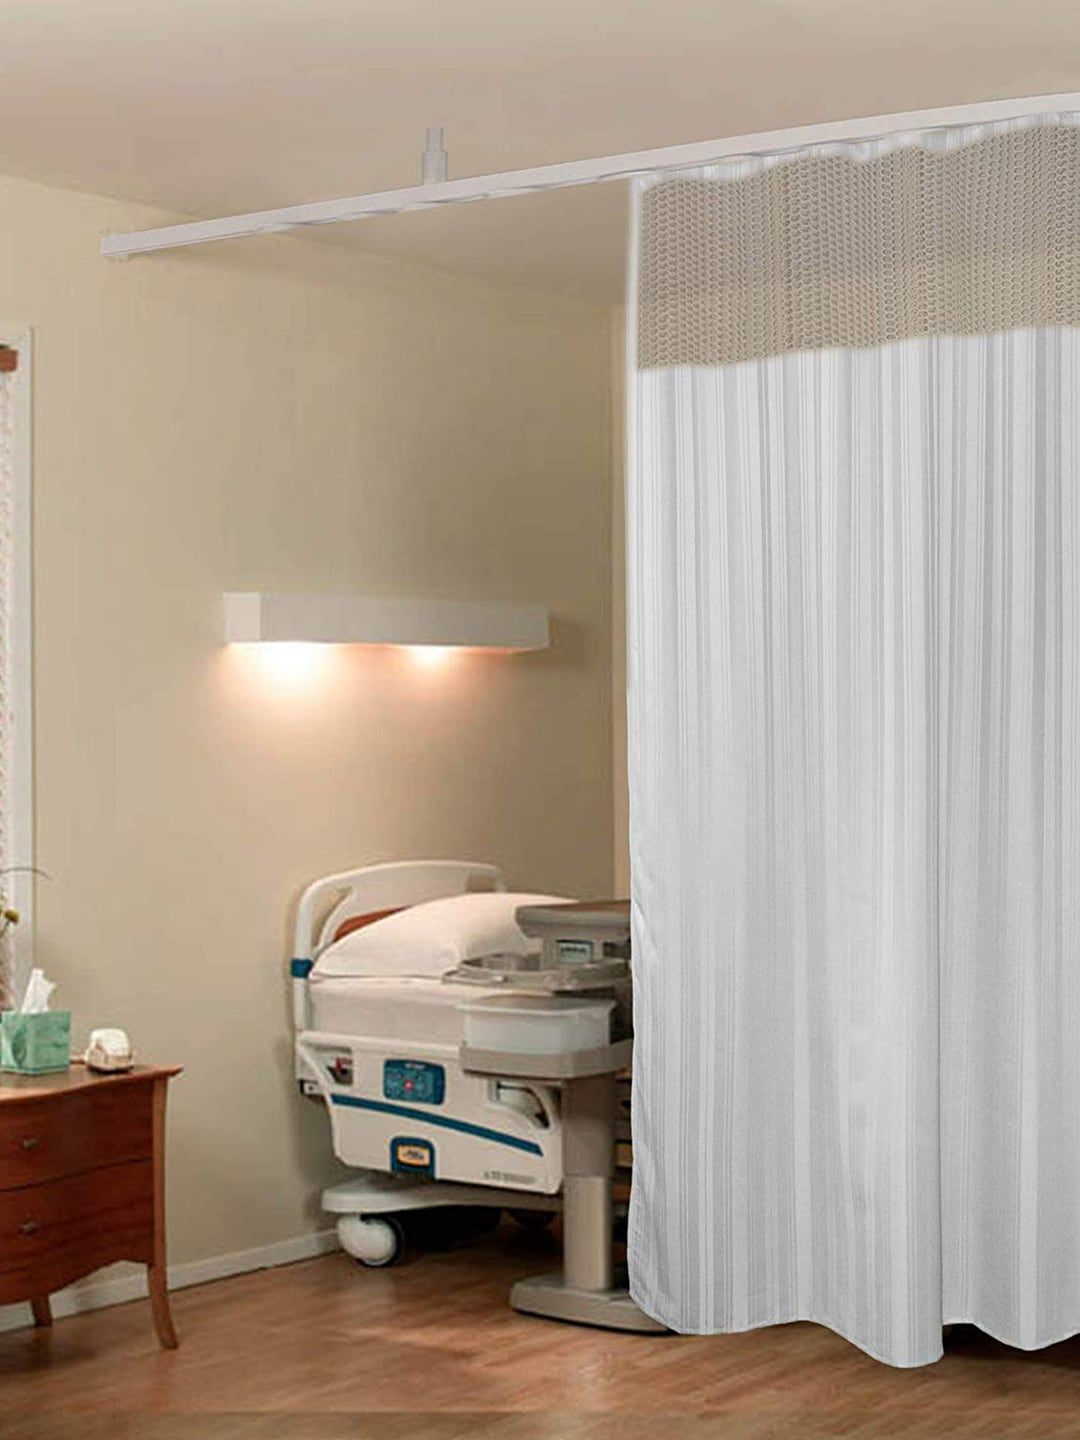 Lushomes White Striped ICU Partition Net Hospital Bed Curtain Price in India